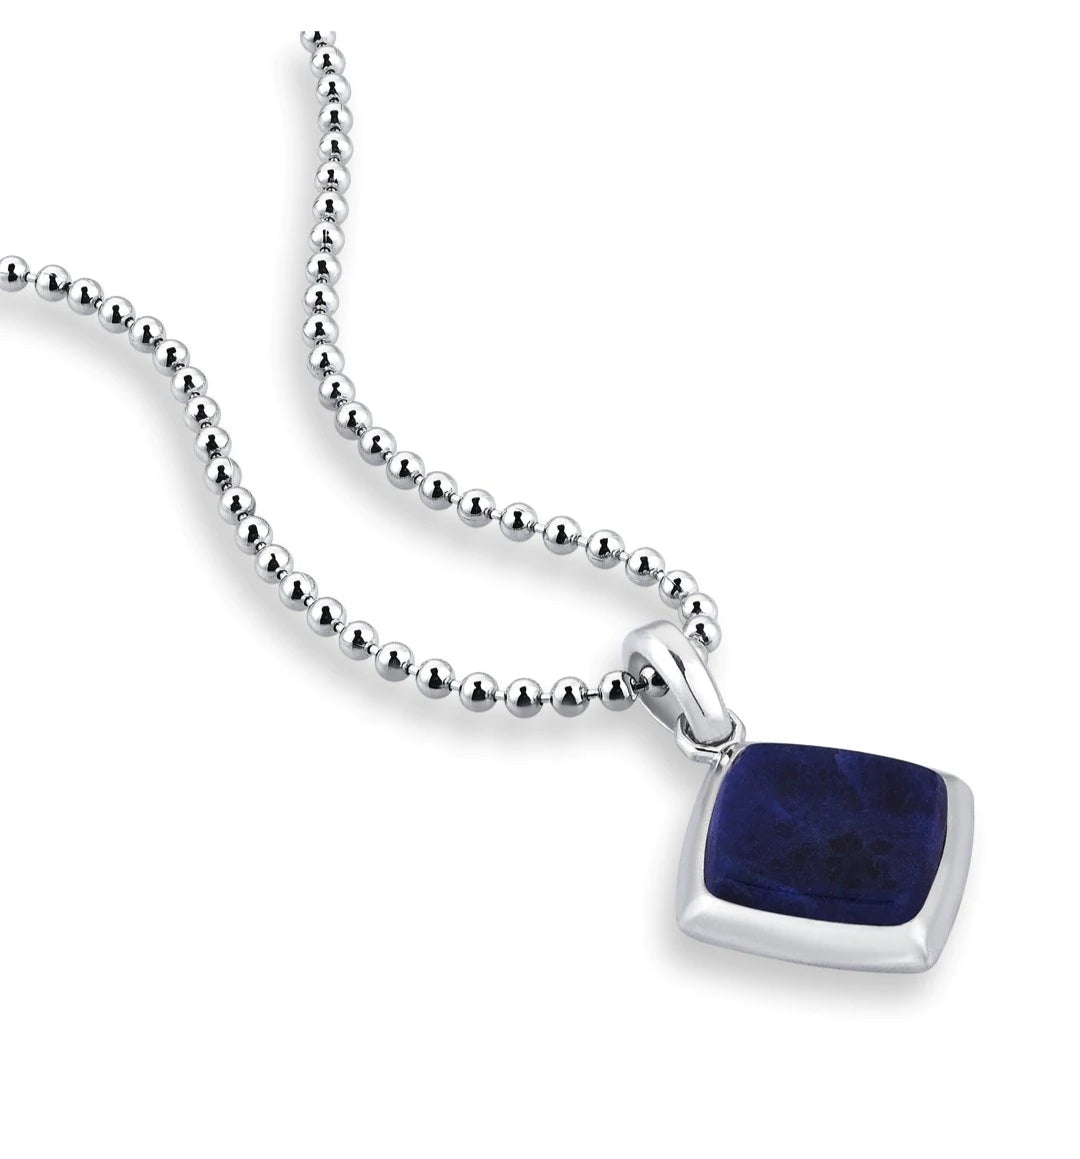 RARE PRINCE by CARAT SUTRA | Unique Designed Silver Pendant in Natural Sodalite for Men, 925 Sterling Silver Pendant | Men's Jewelry | With Certificate of Authenticity and 925 Hallmark - caratsutra